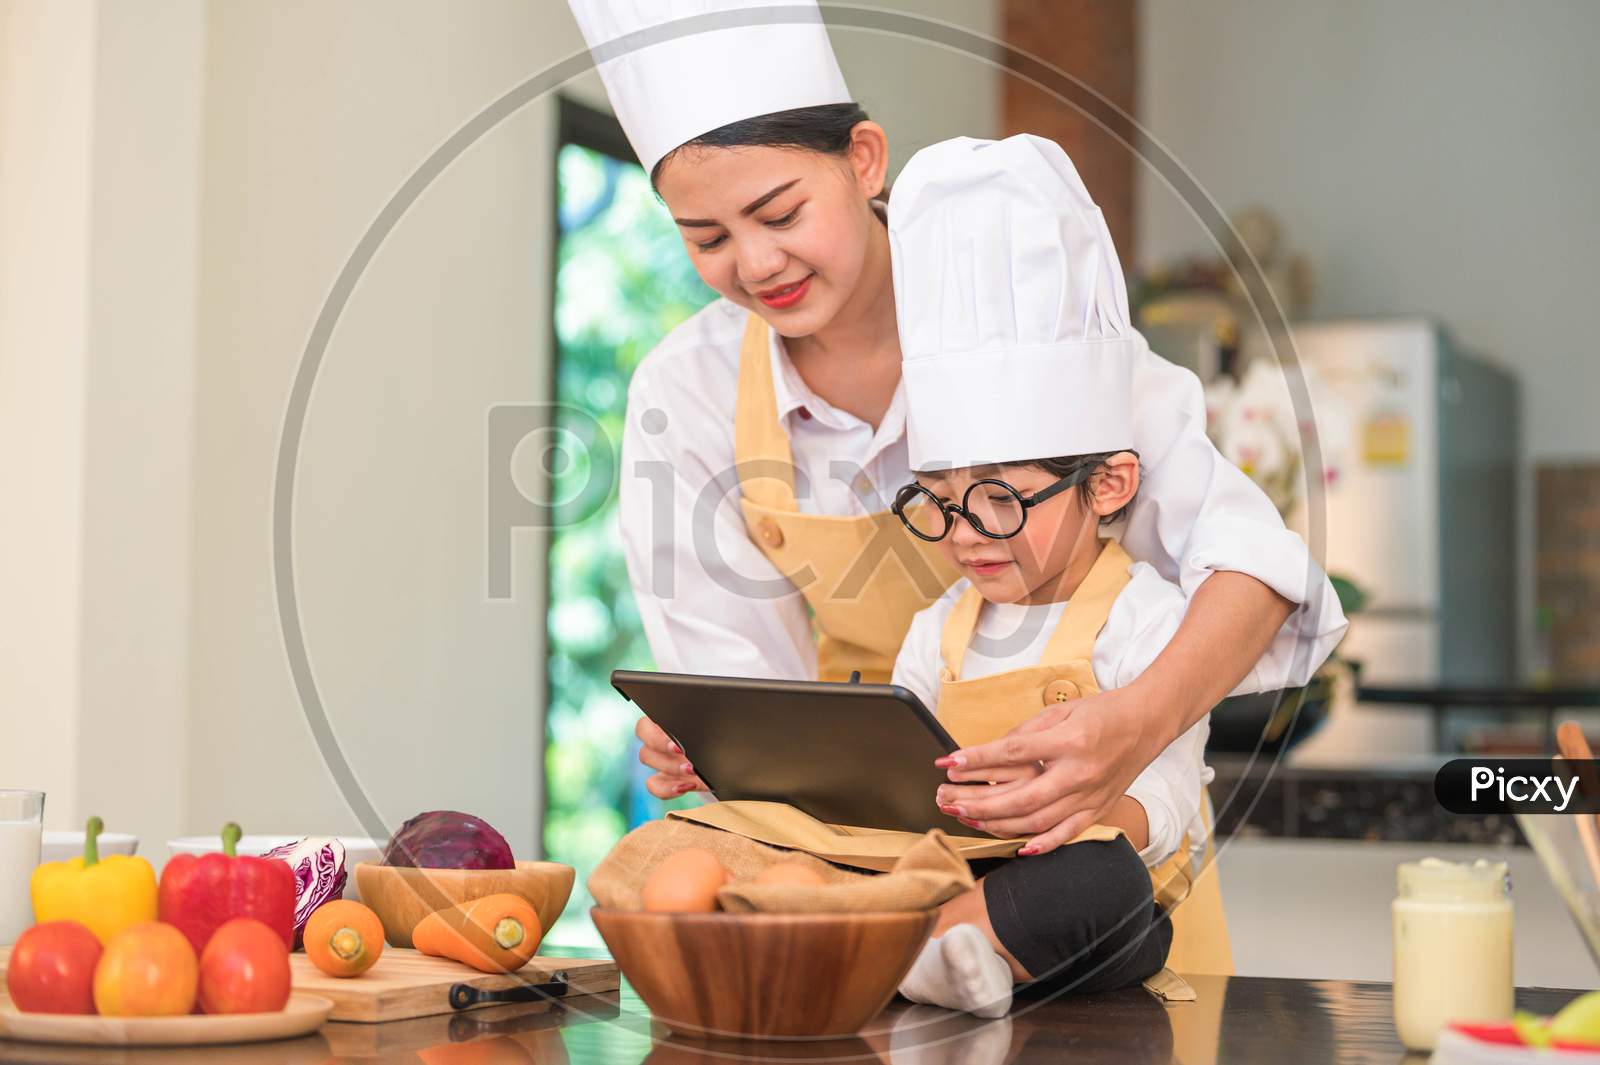 Beautiful Asian Woman And Cute Little Boy With Eyeglasses Prepare To Cooking In Kitchen At Home With Tablet. People Lifestyles And Family. Homemade Food And Ingredients Concept. Ketogenic Salad Making